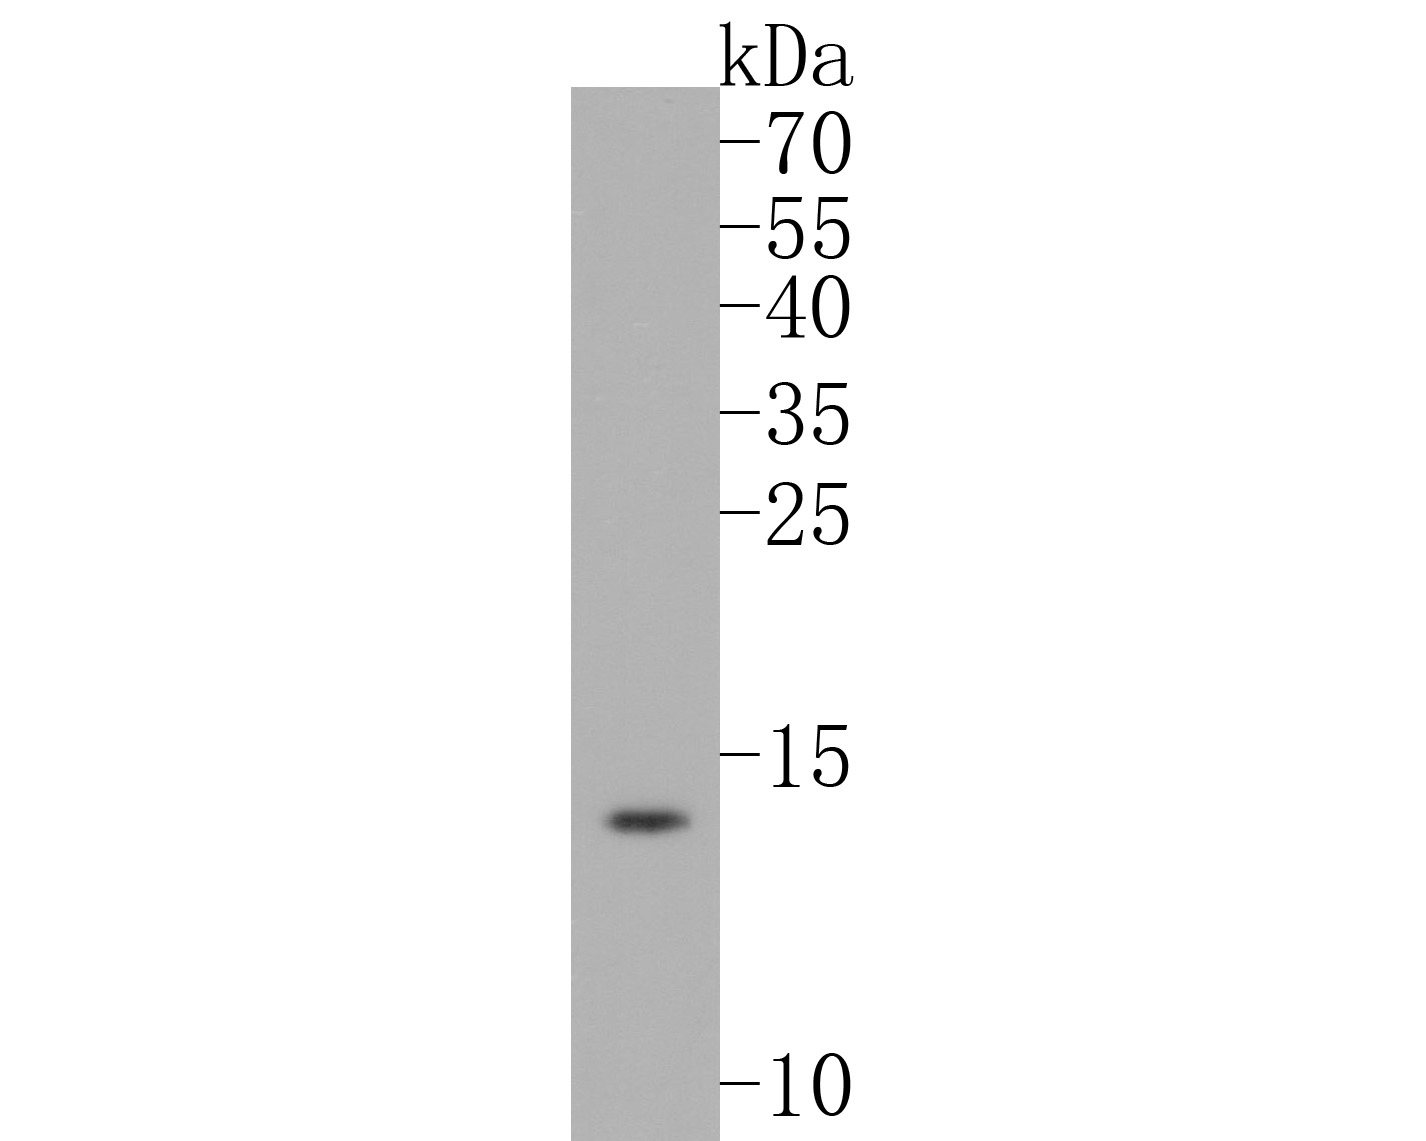 Western blot analysis of Sumo 2+3 on SW480 cell lysates. Proteins were transferred to a PVDF membrane and blocked with 5% BSA in PBS for 1 hour at room temperature. The primary antibody (ET1701-17, 1/500) was used in 5% BSA at room temperature for 2 hours. Goat Anti-Rabbit IgG - HRP Secondary Antibody (HA1001) at 1:5,000 dilution was used for 1 hour at room temperature.